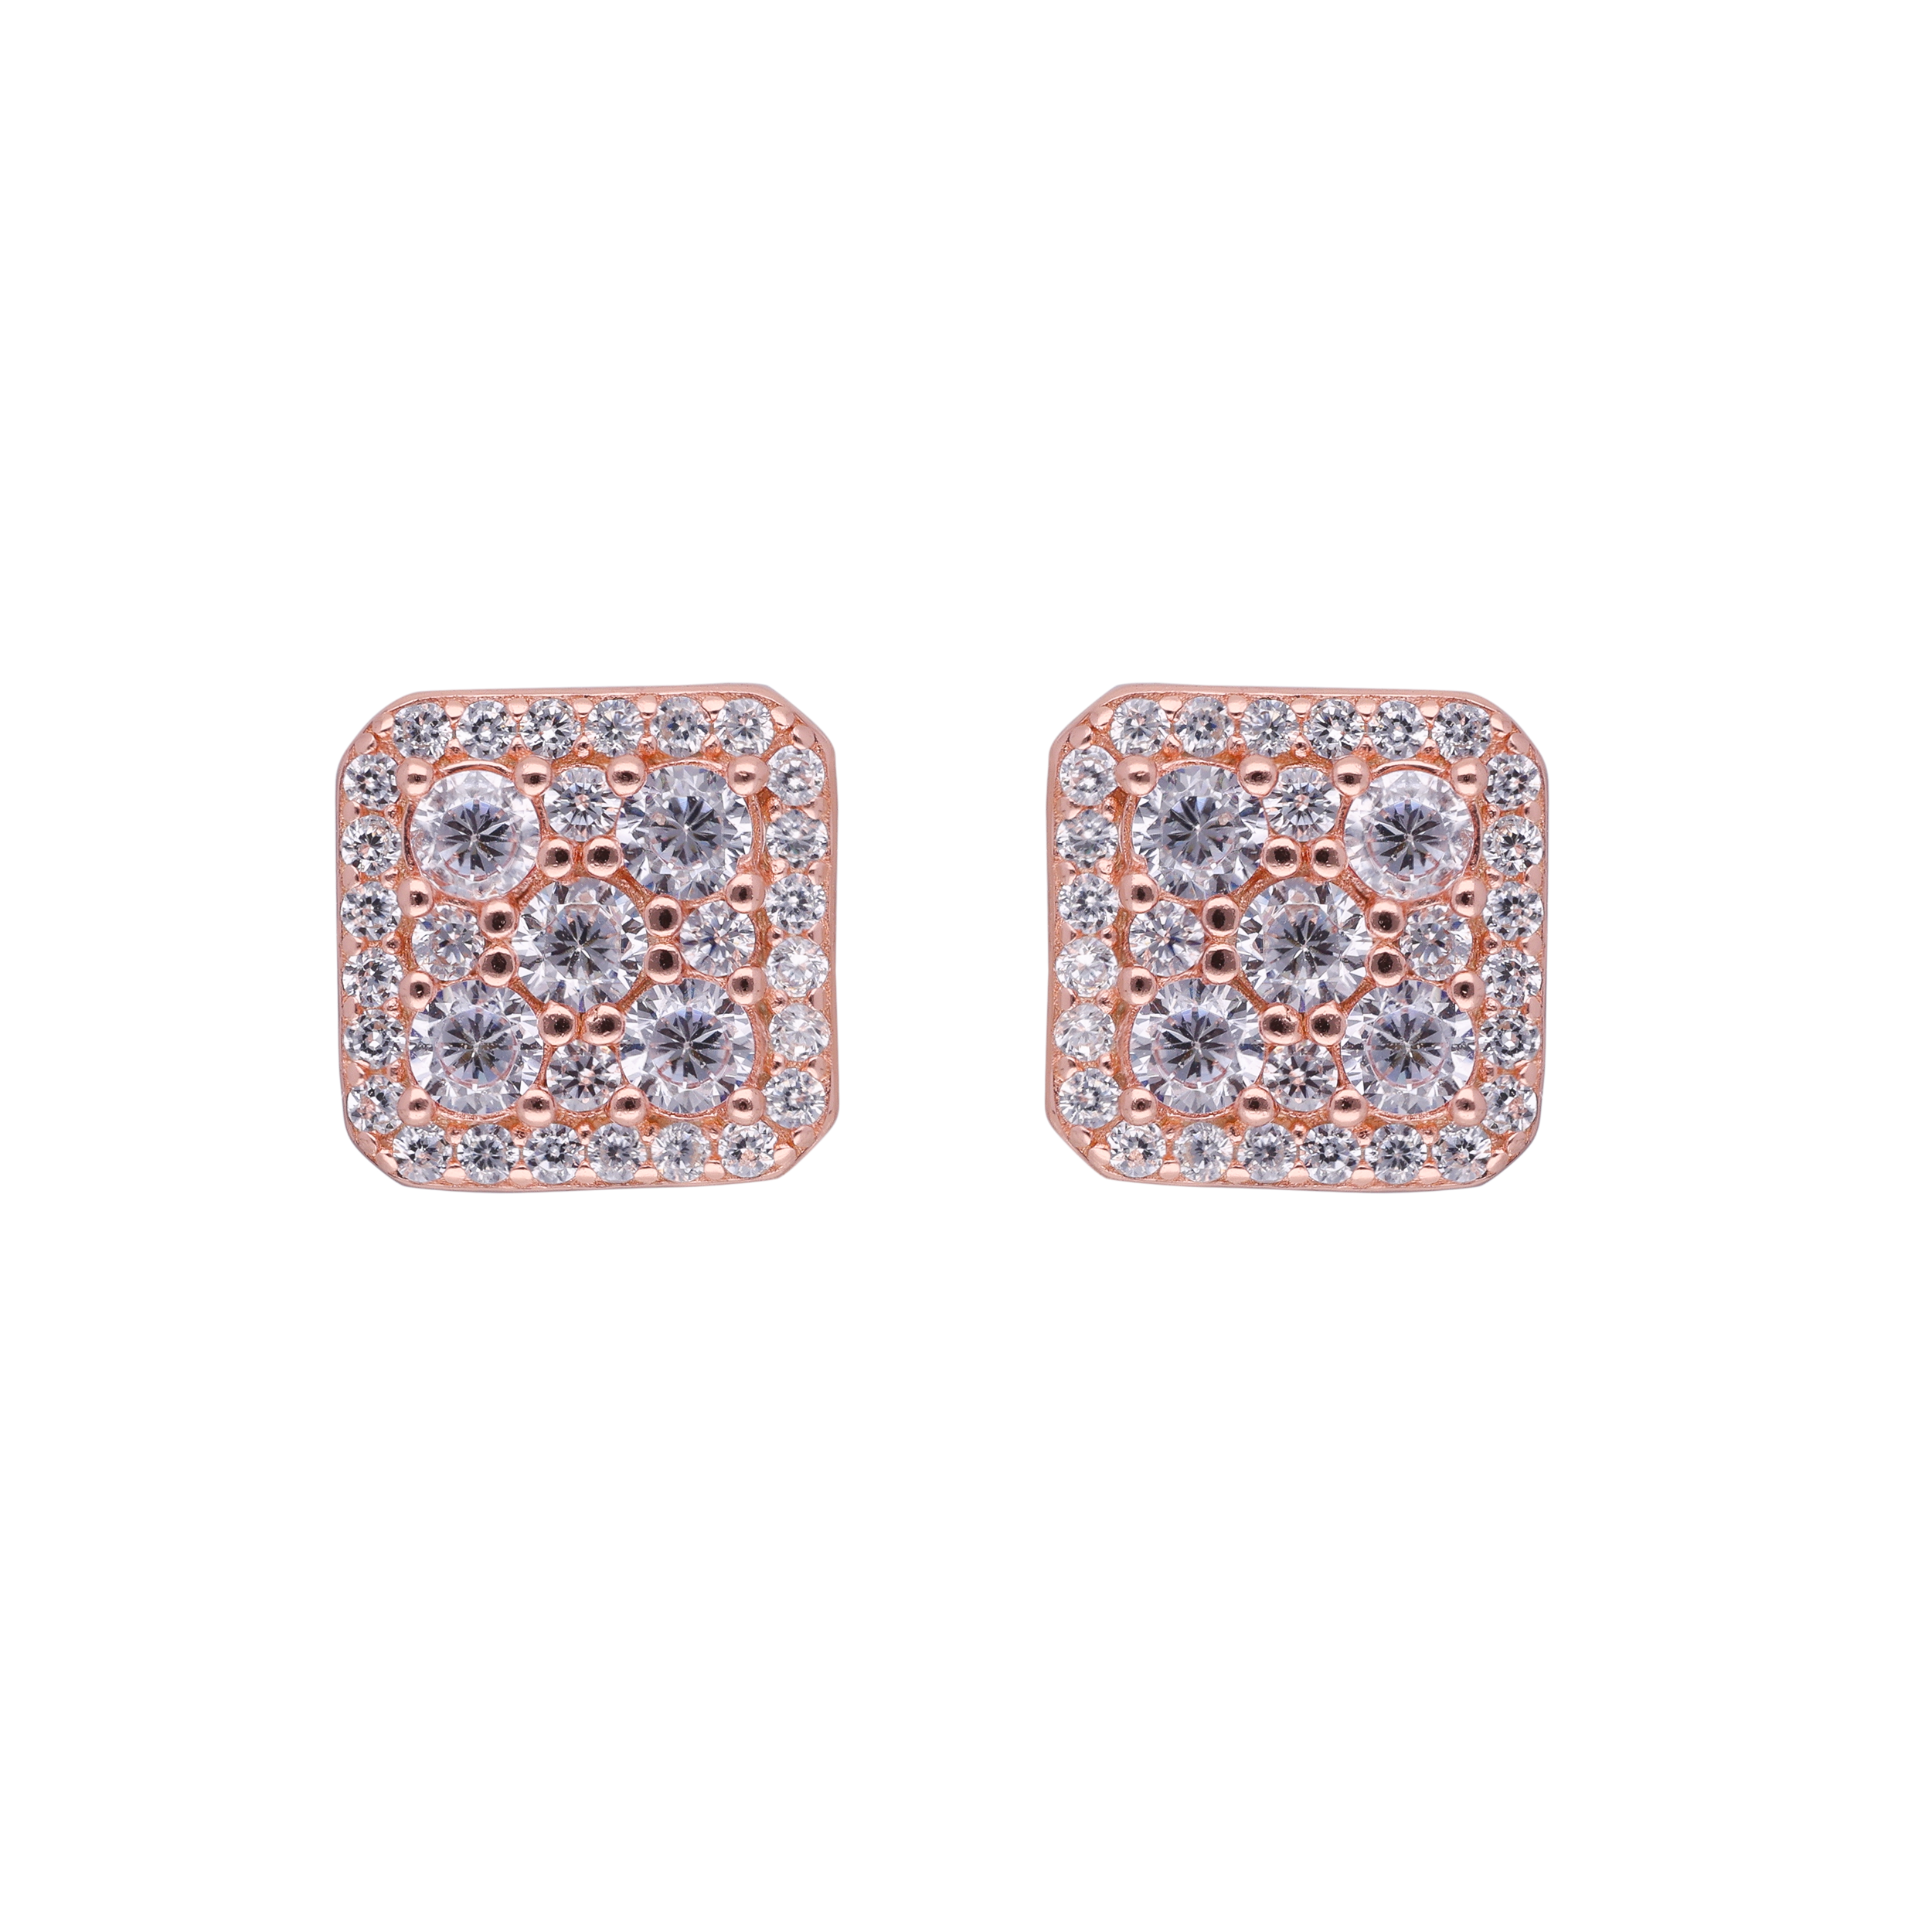 "Chic Rose Gold Studs Accents" | SKU : 0019272726, 0019281353